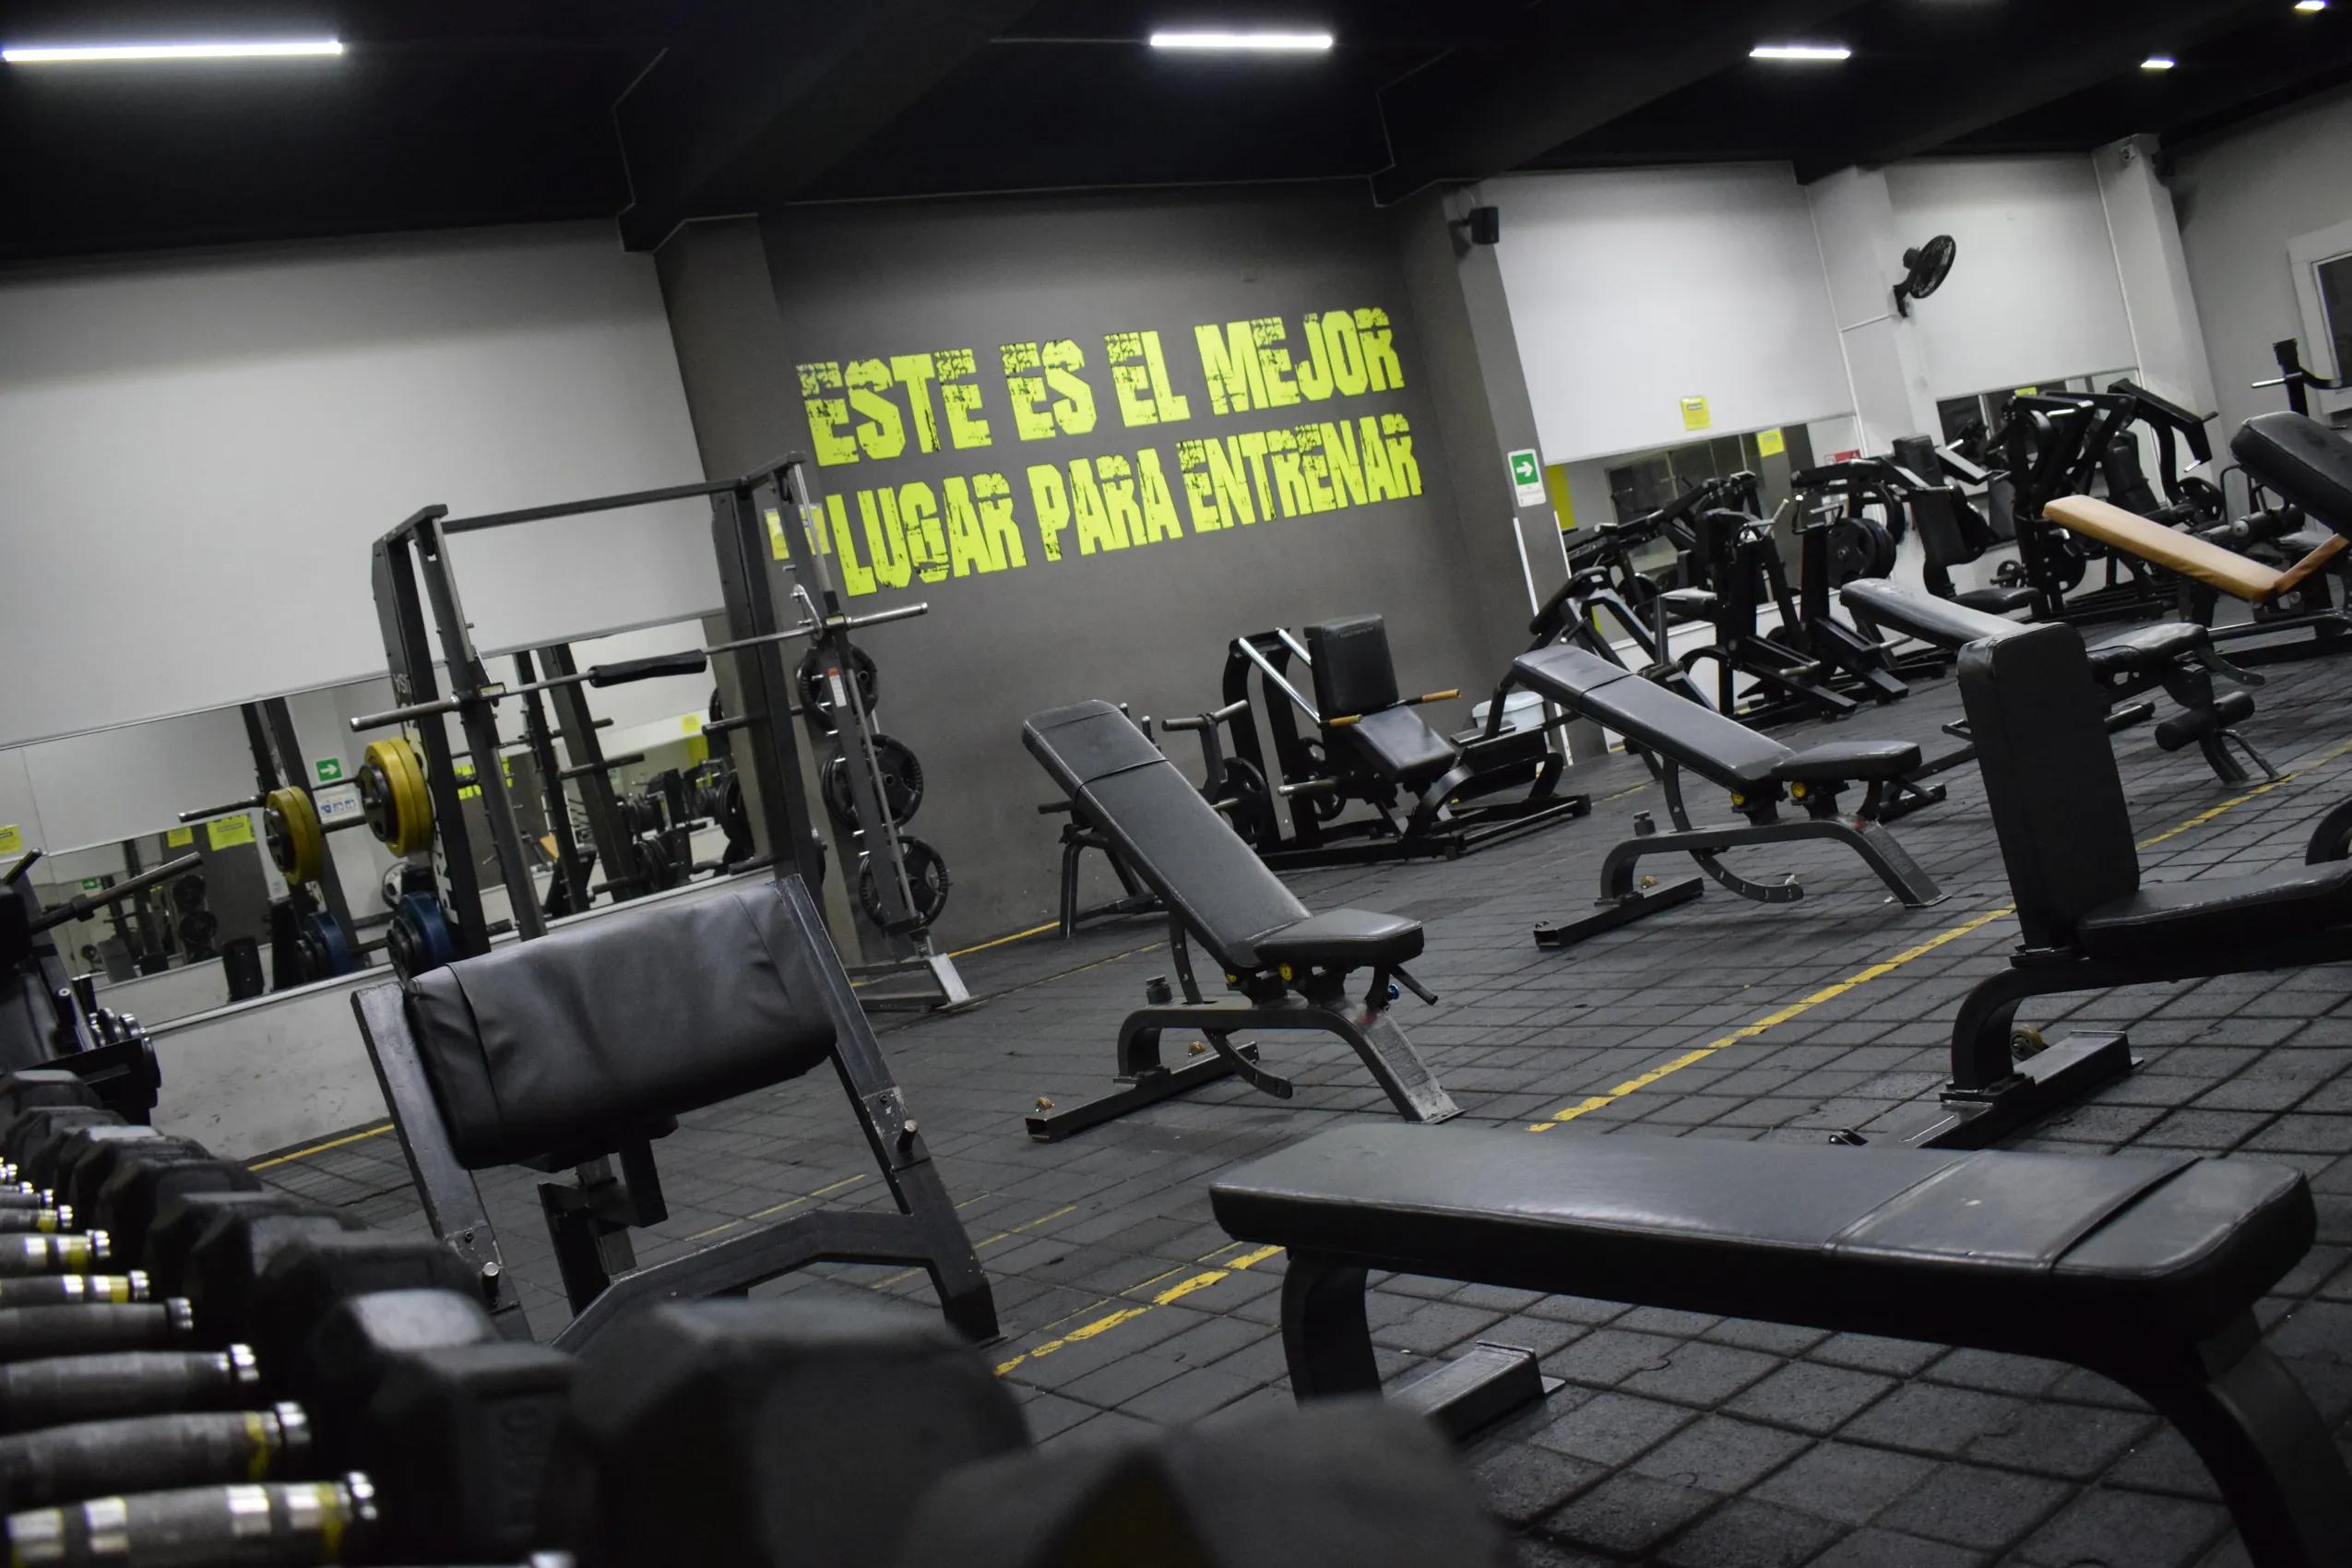 Planes - Fitness People Colombia